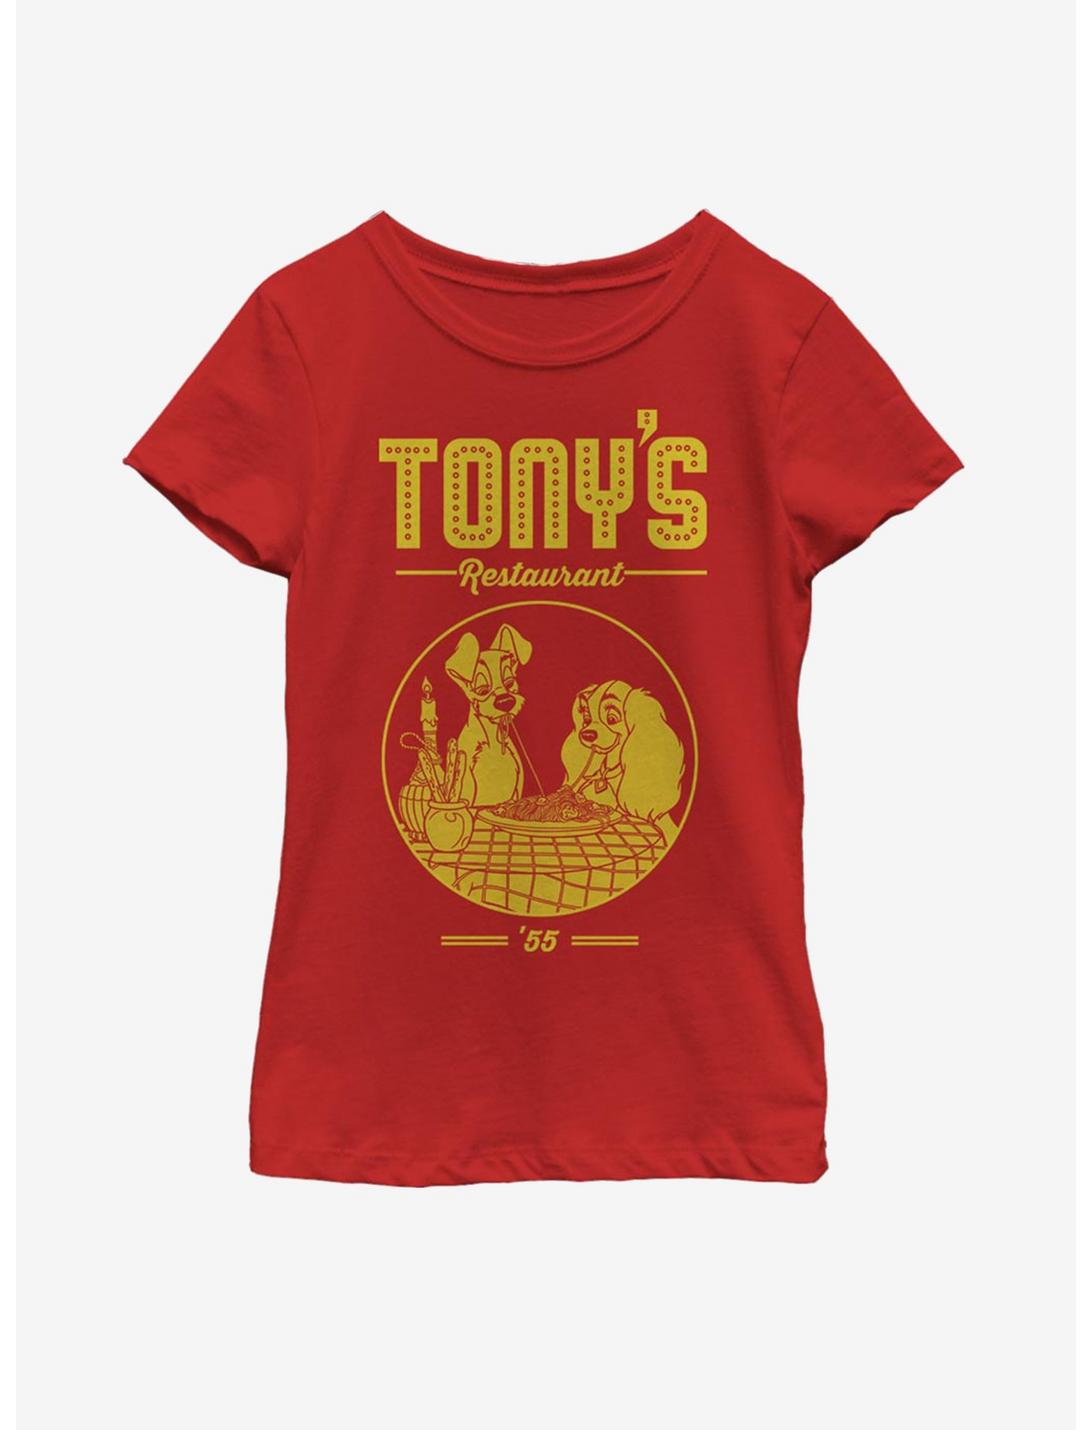 Disney Lady And The Tramp Tony's Restaurant Youth Girls T-Shirt, RED, hi-res